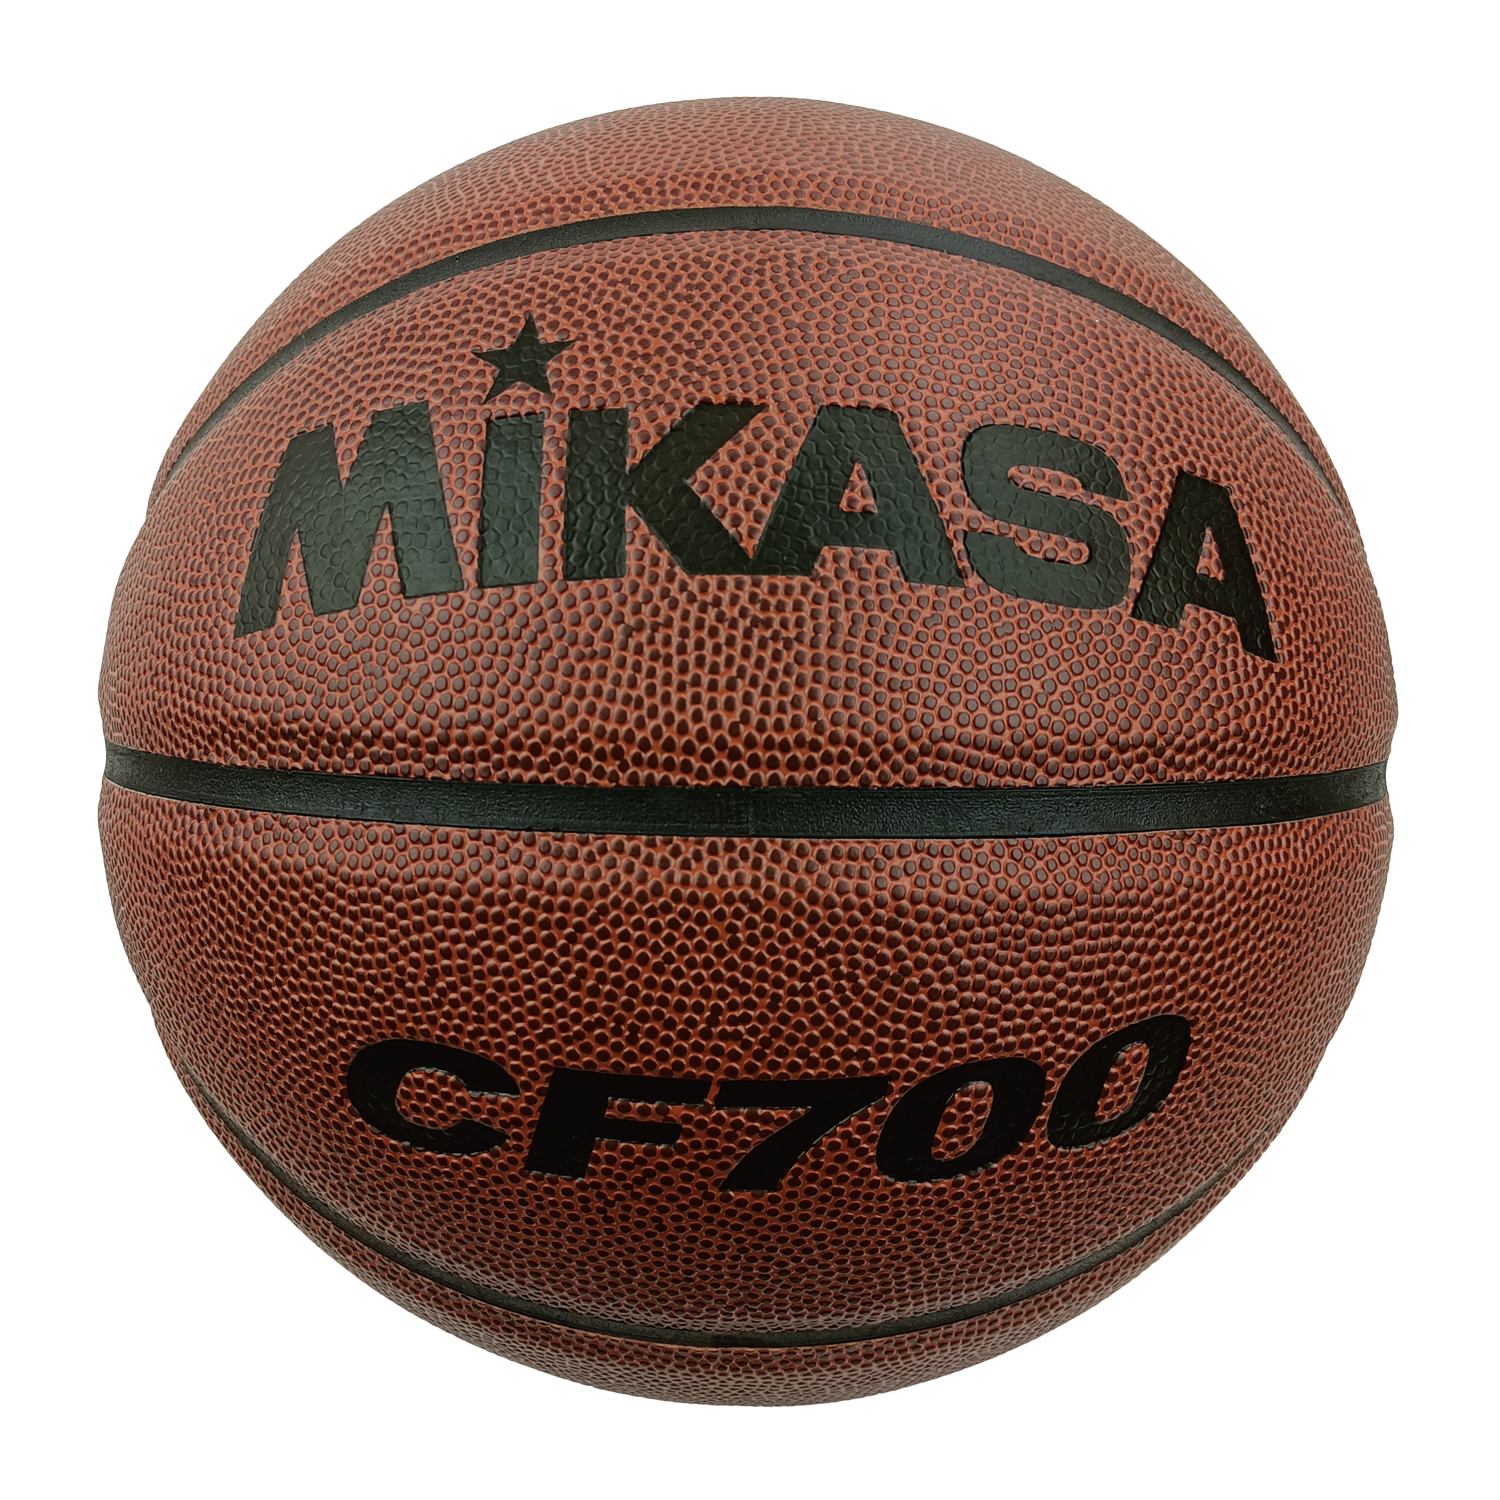 MIKASA CF700 BASKETBALL HIGH GRADE SYNTHETIC LEATHER SIZE 7, , large image number null